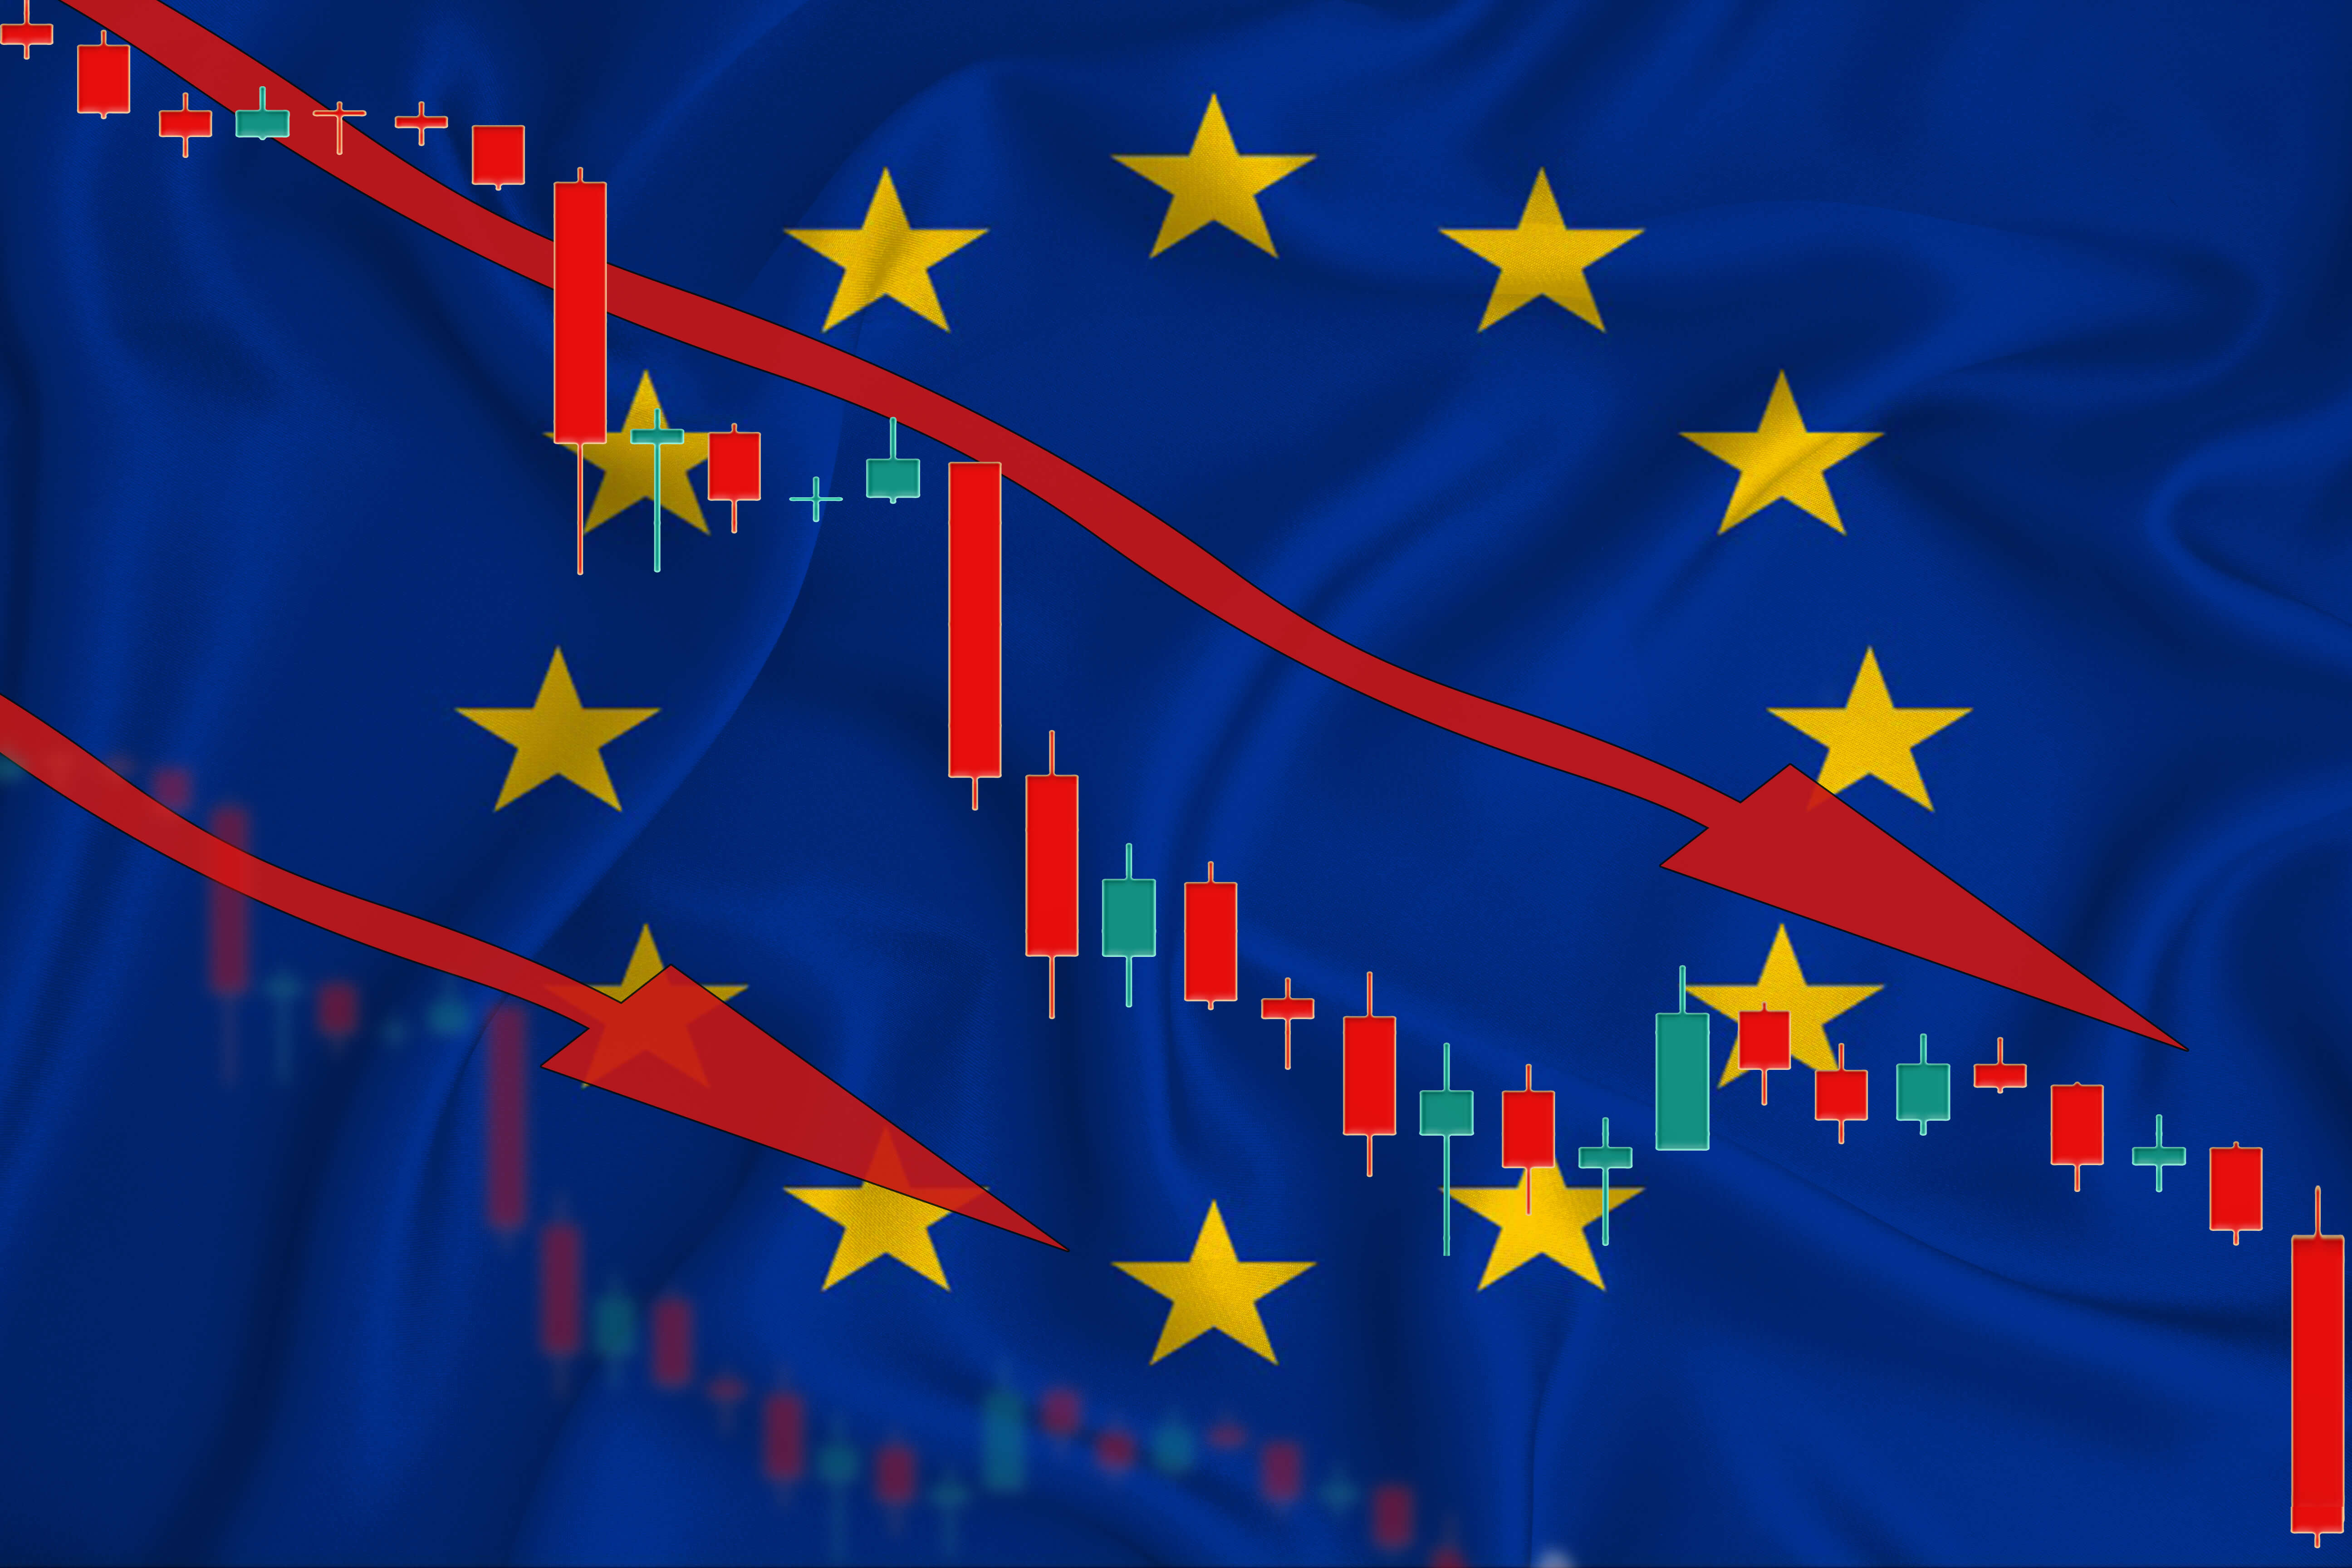 FinanceBrokerage - Economic News:  The European markets fluctuated as they reacted to Coronavirus pandemic in the U.S and globally.